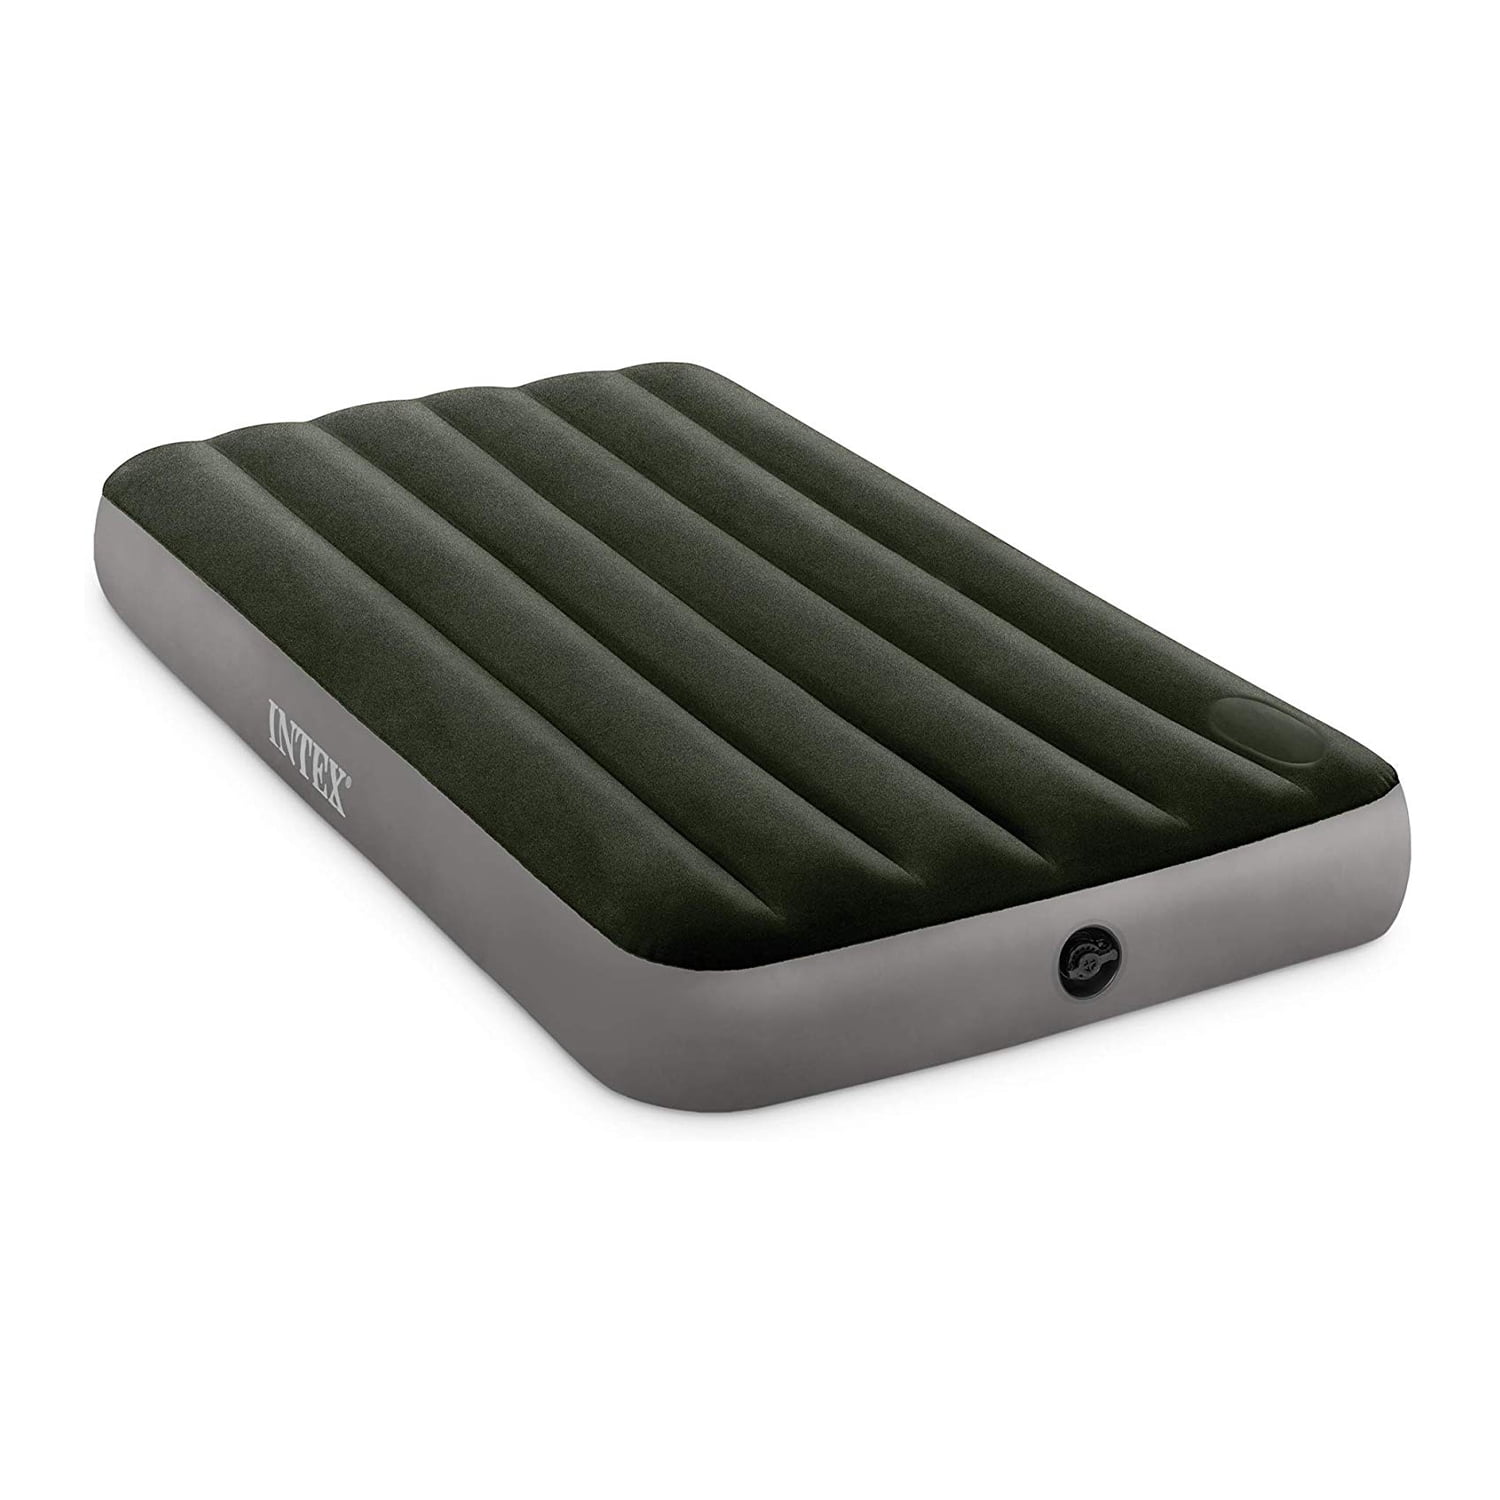 Intex Dura-Beam Standard Series Downy Airbed with Built-In Foot Pump, Full  Size